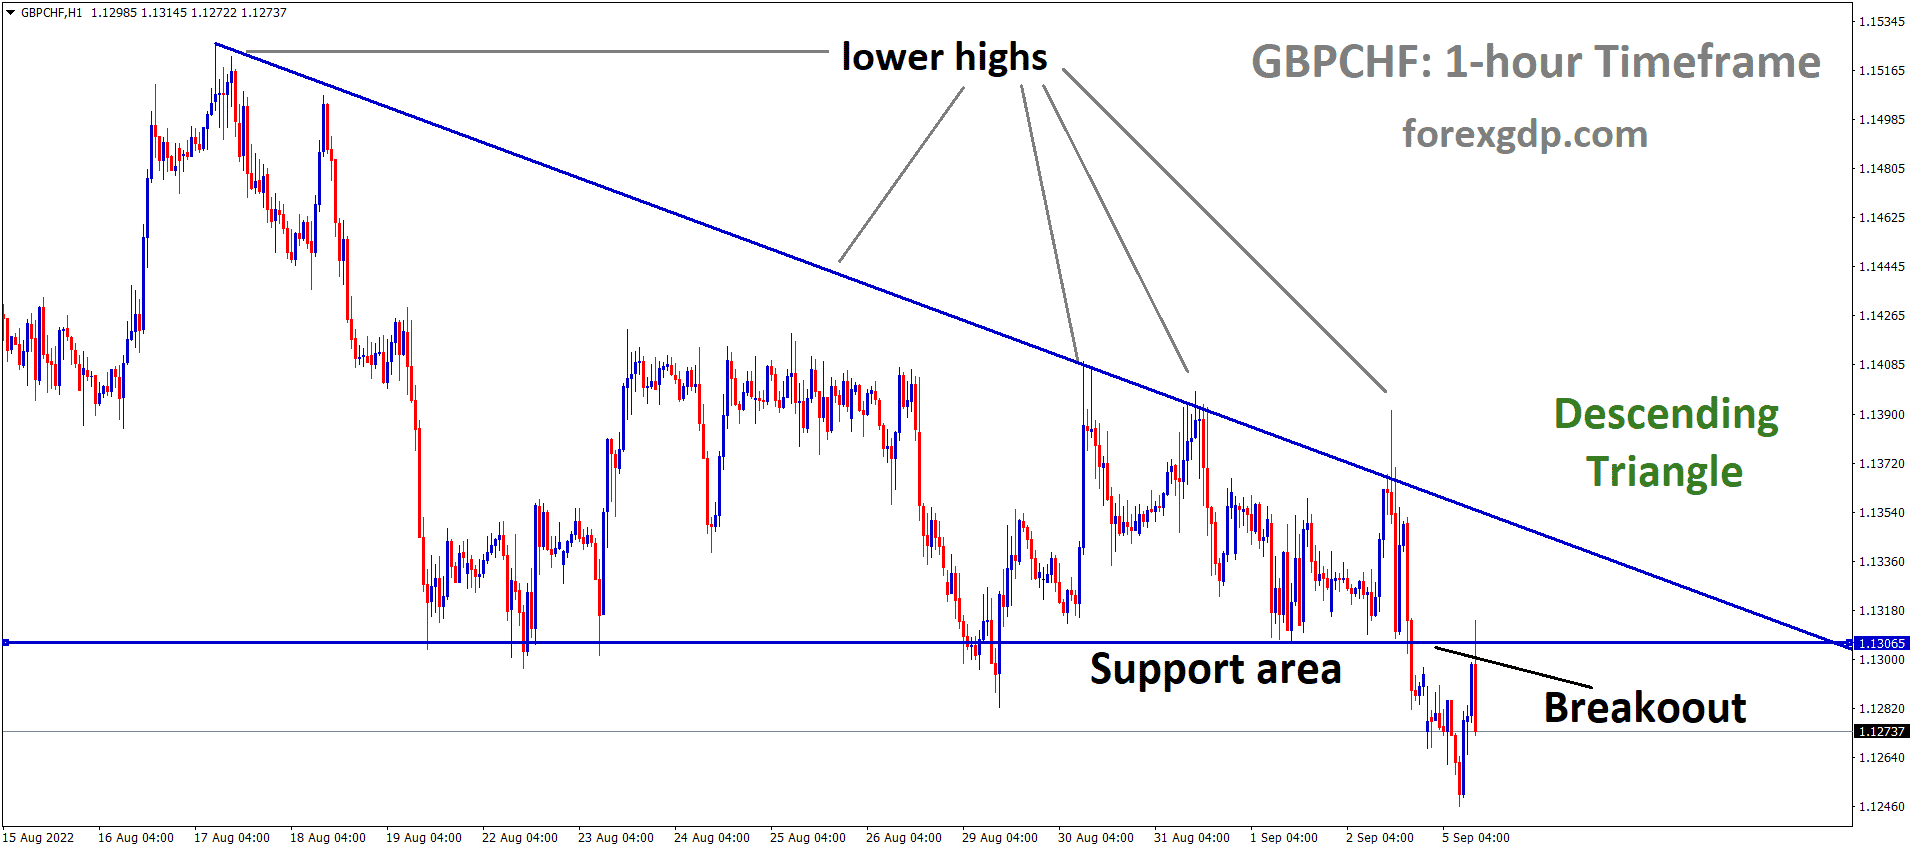 GBPCHF has broken the Descending triangle pattern in Downside